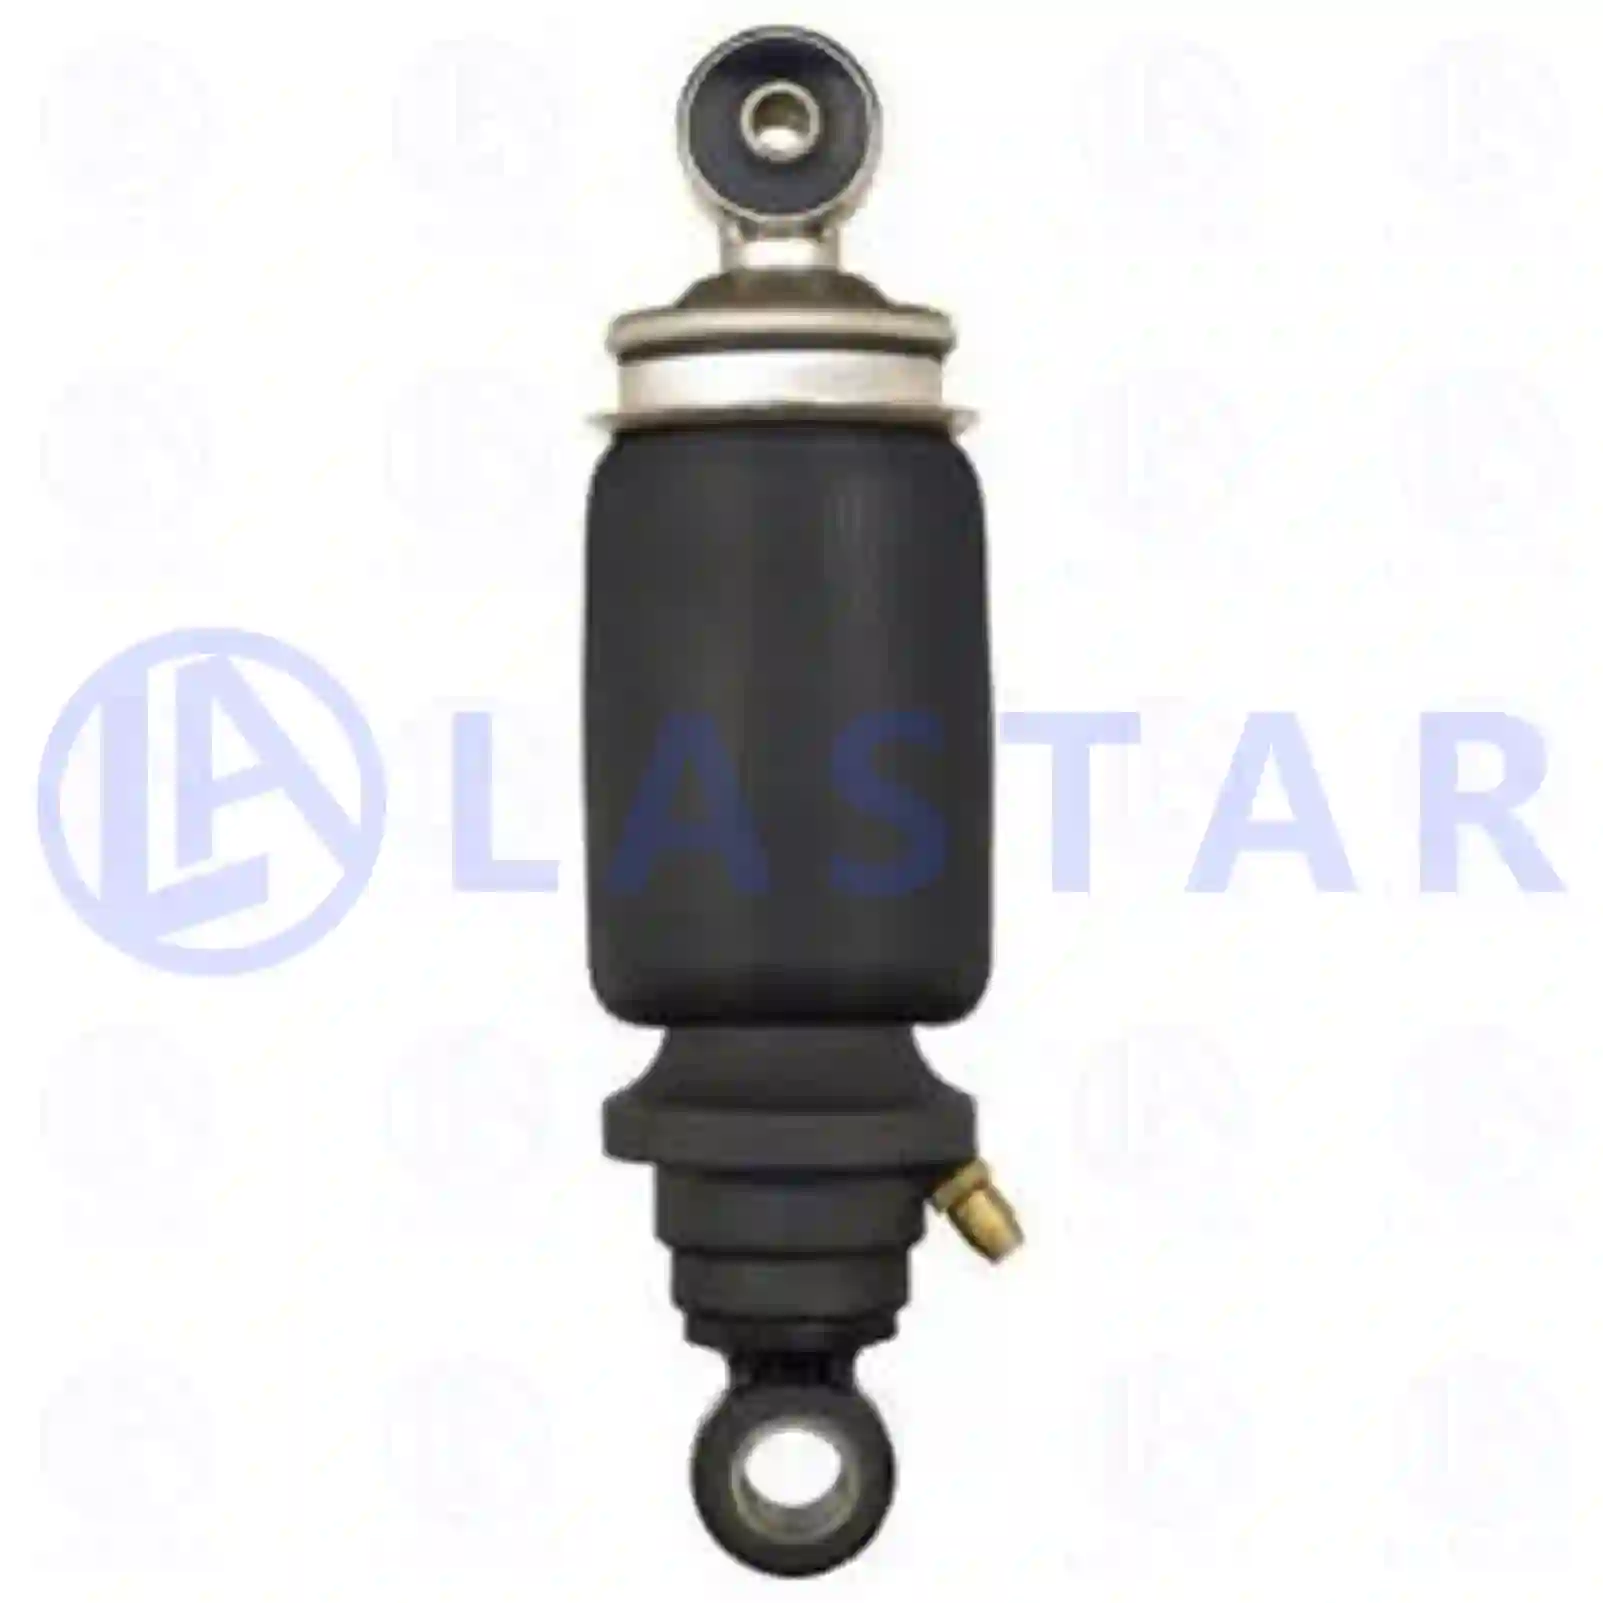 Cabin shock absorber, with air bellow, 77734869, 9428907019 ||  77734869 Lastar Spare Part | Truck Spare Parts, Auotomotive Spare Parts Cabin shock absorber, with air bellow, 77734869, 9428907019 ||  77734869 Lastar Spare Part | Truck Spare Parts, Auotomotive Spare Parts